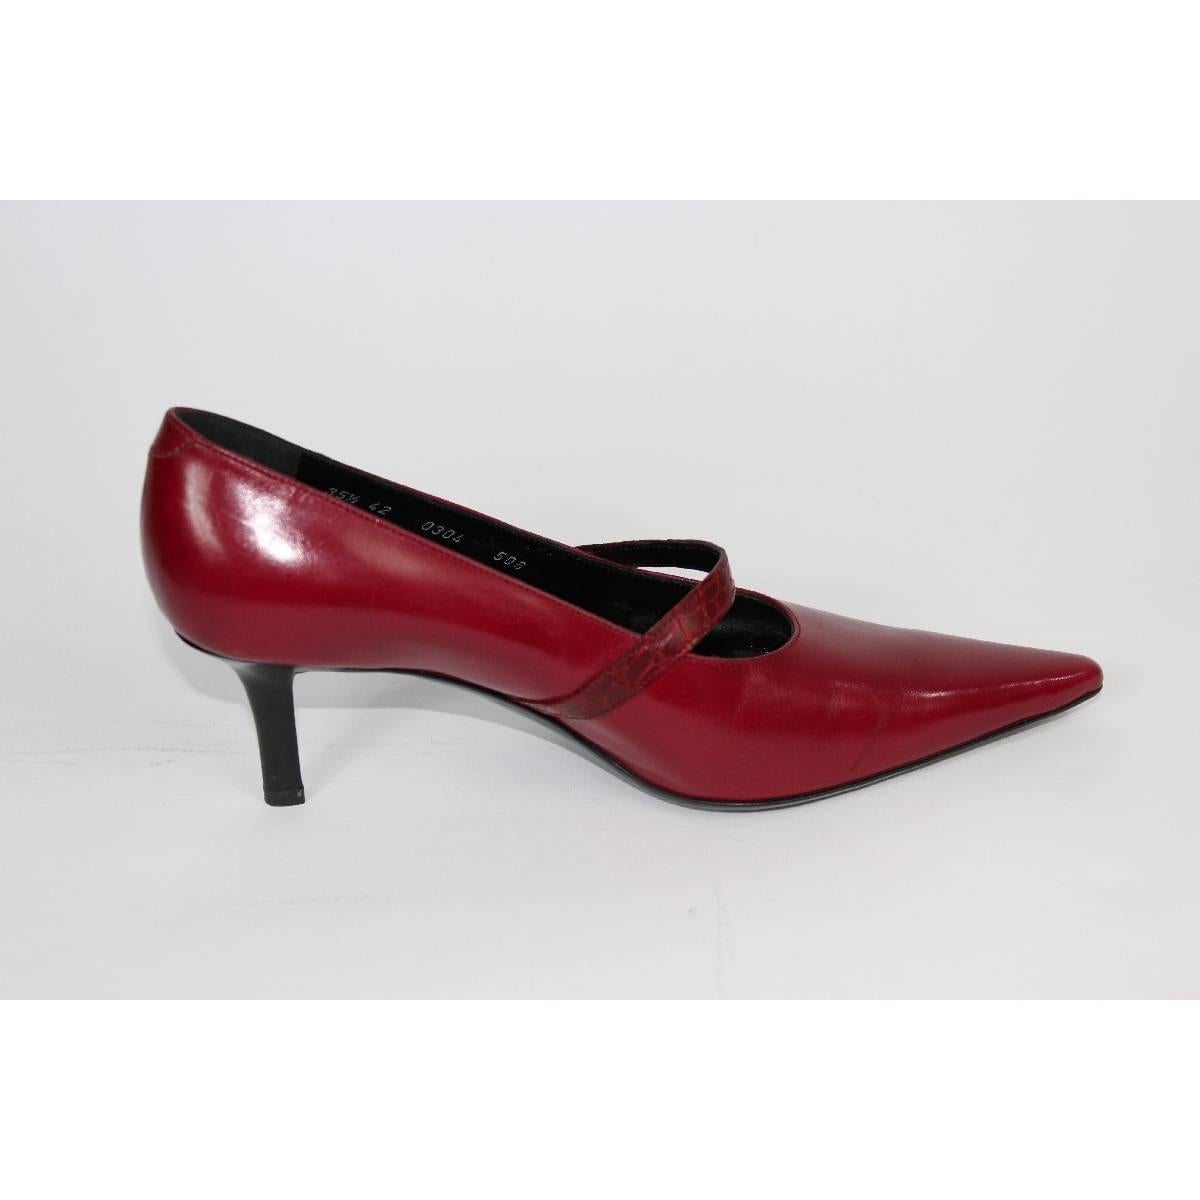 Brown 1980s Roberta Di Camerino Red Leather Hells Pumps Shoes For Sale